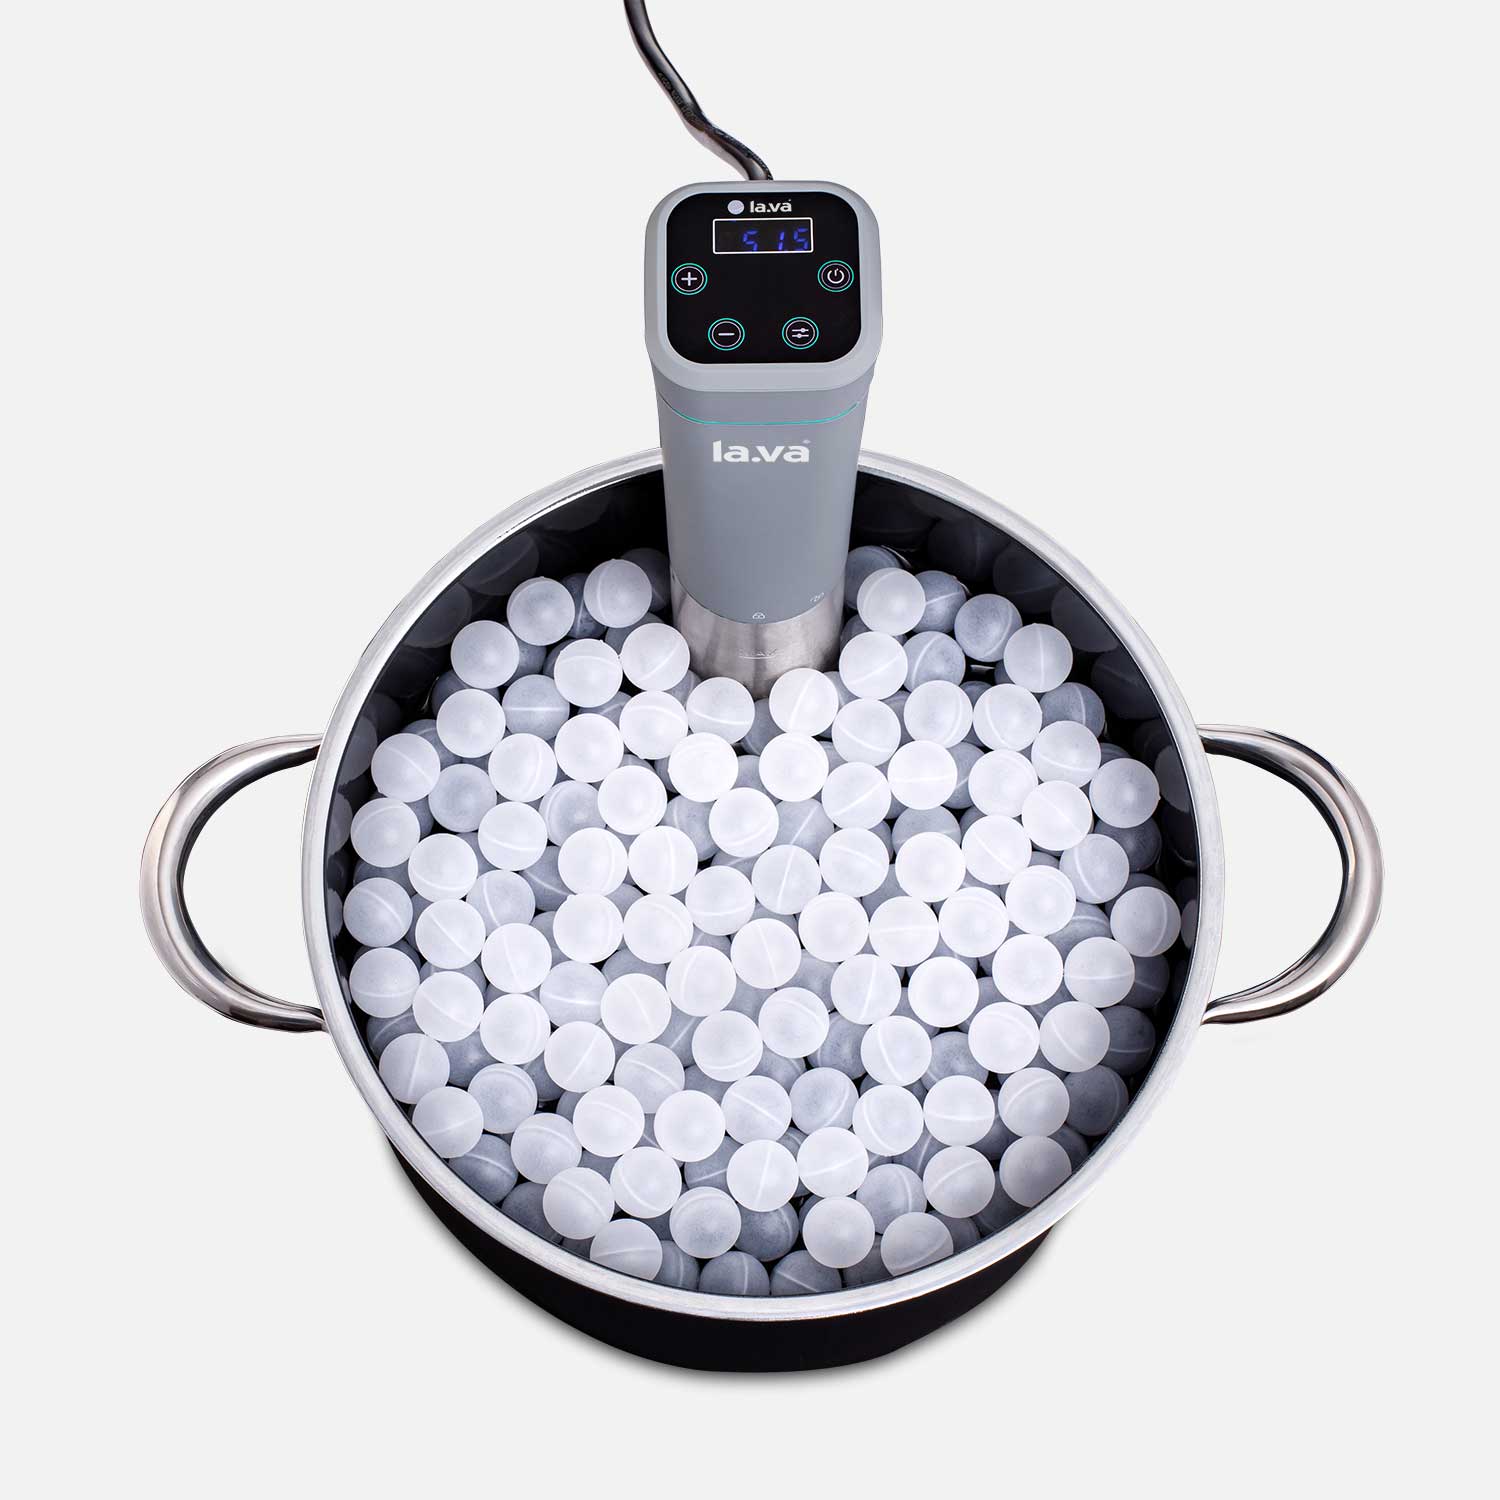 Sous-vide stick with insulation balls in a cooking pot